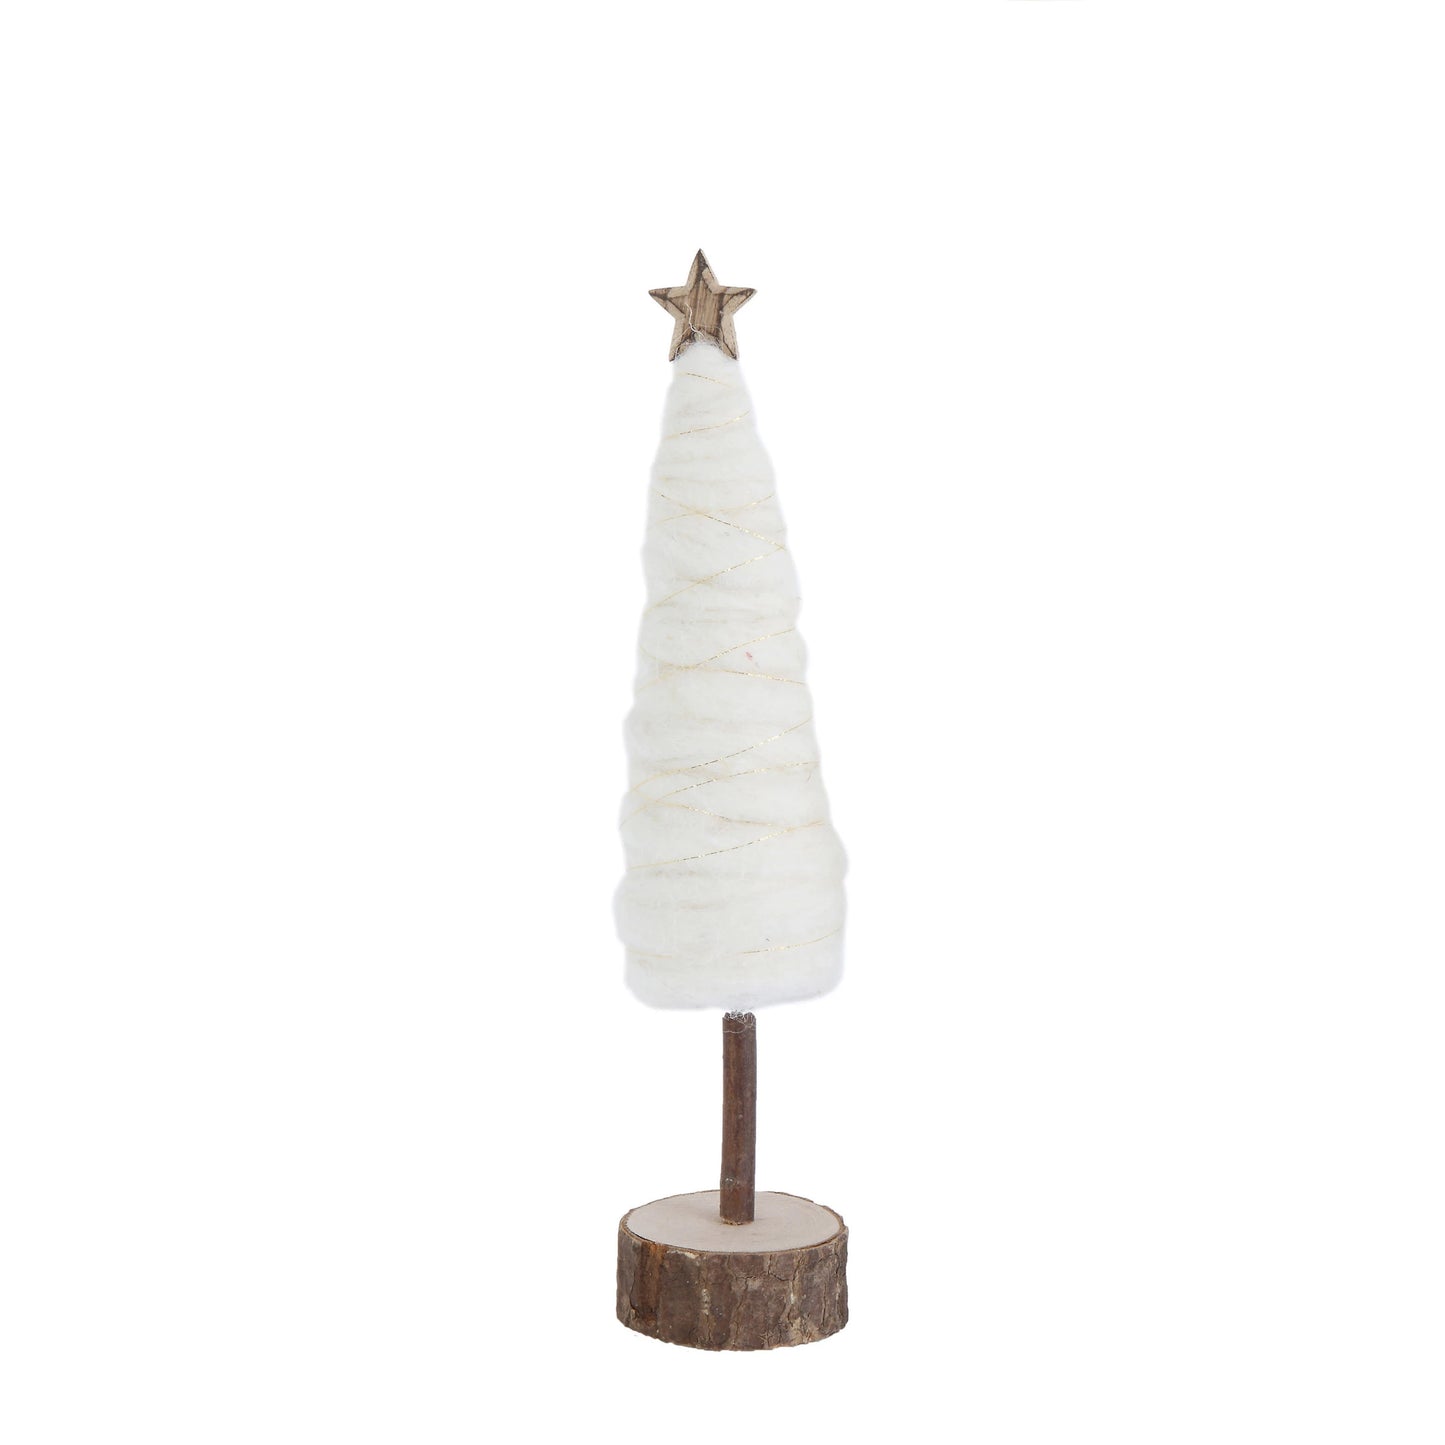 Wool Christmas Tree with Star - Small